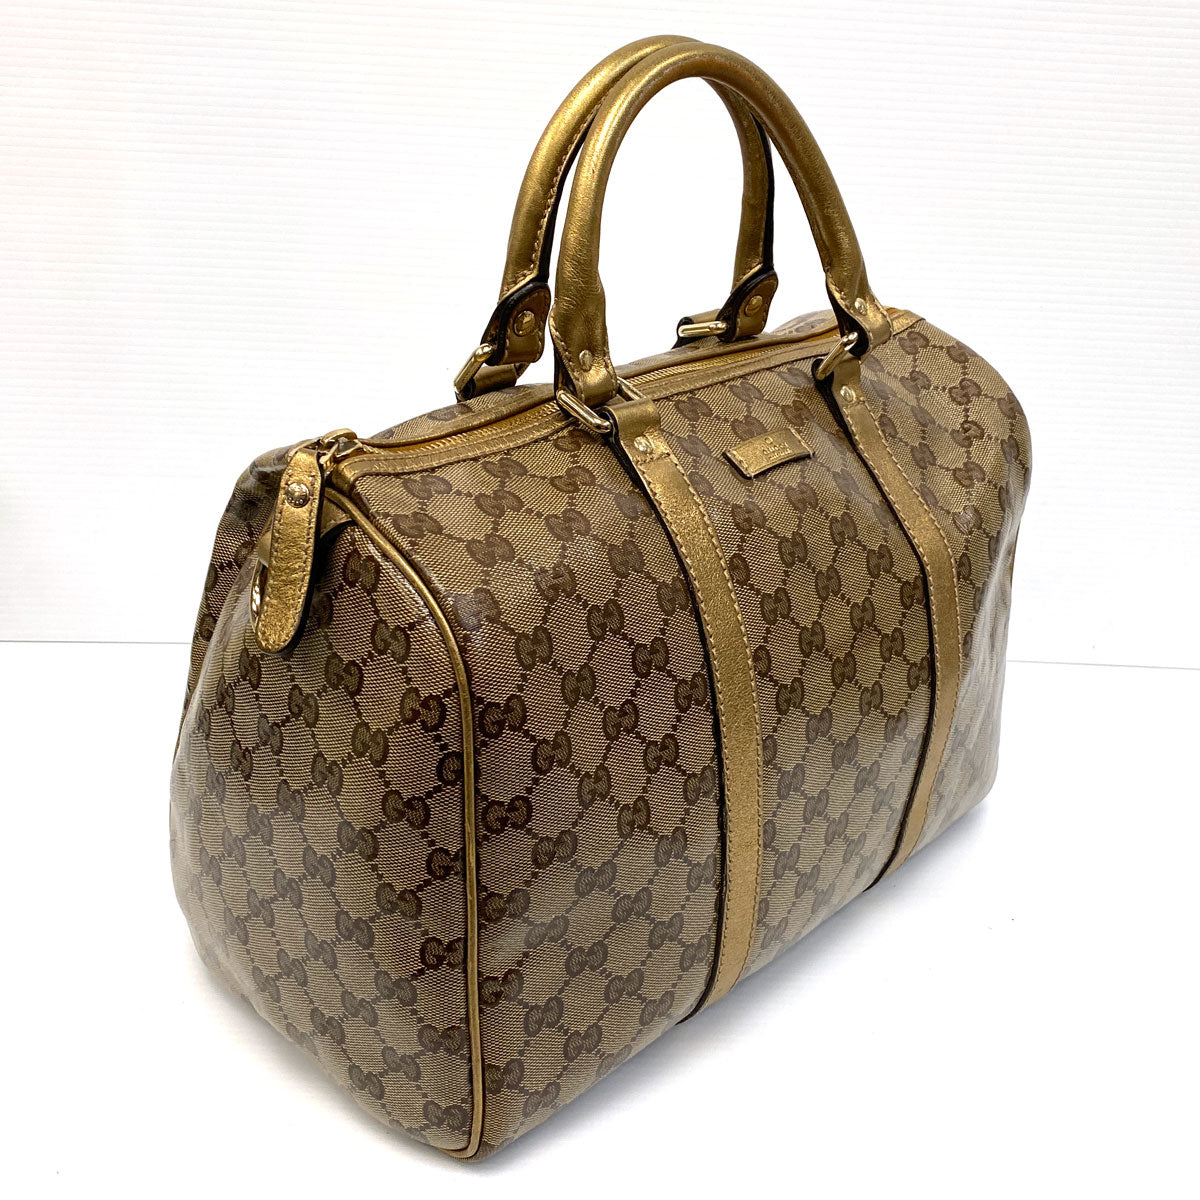 Buy Gucci Boston Bag Online In India -  India